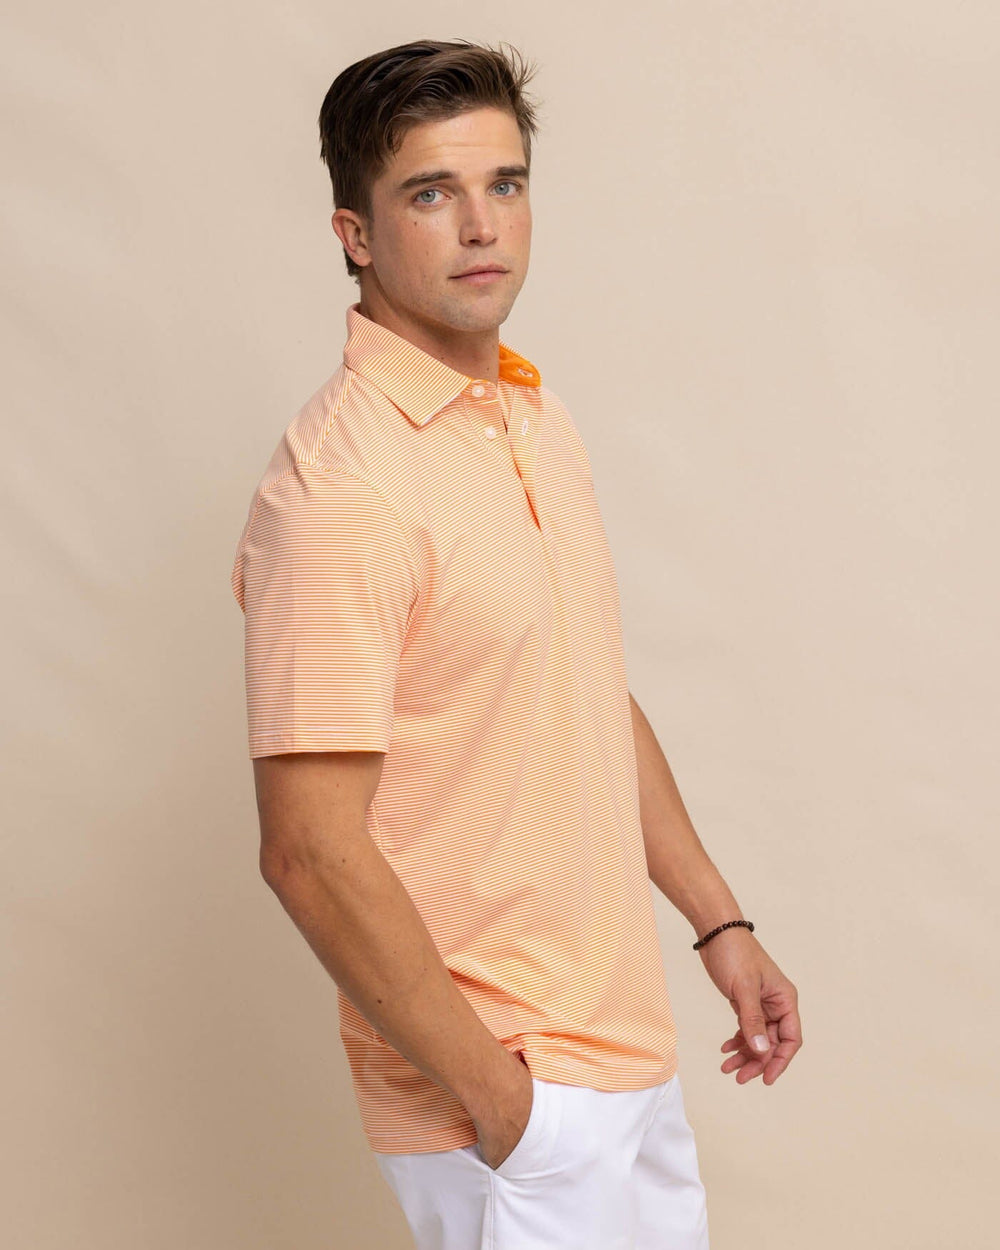 The front view of the Southern Tide brrr-eeze-meadowbrook-stripe-polo by Southern Tide - Tangerine Orange